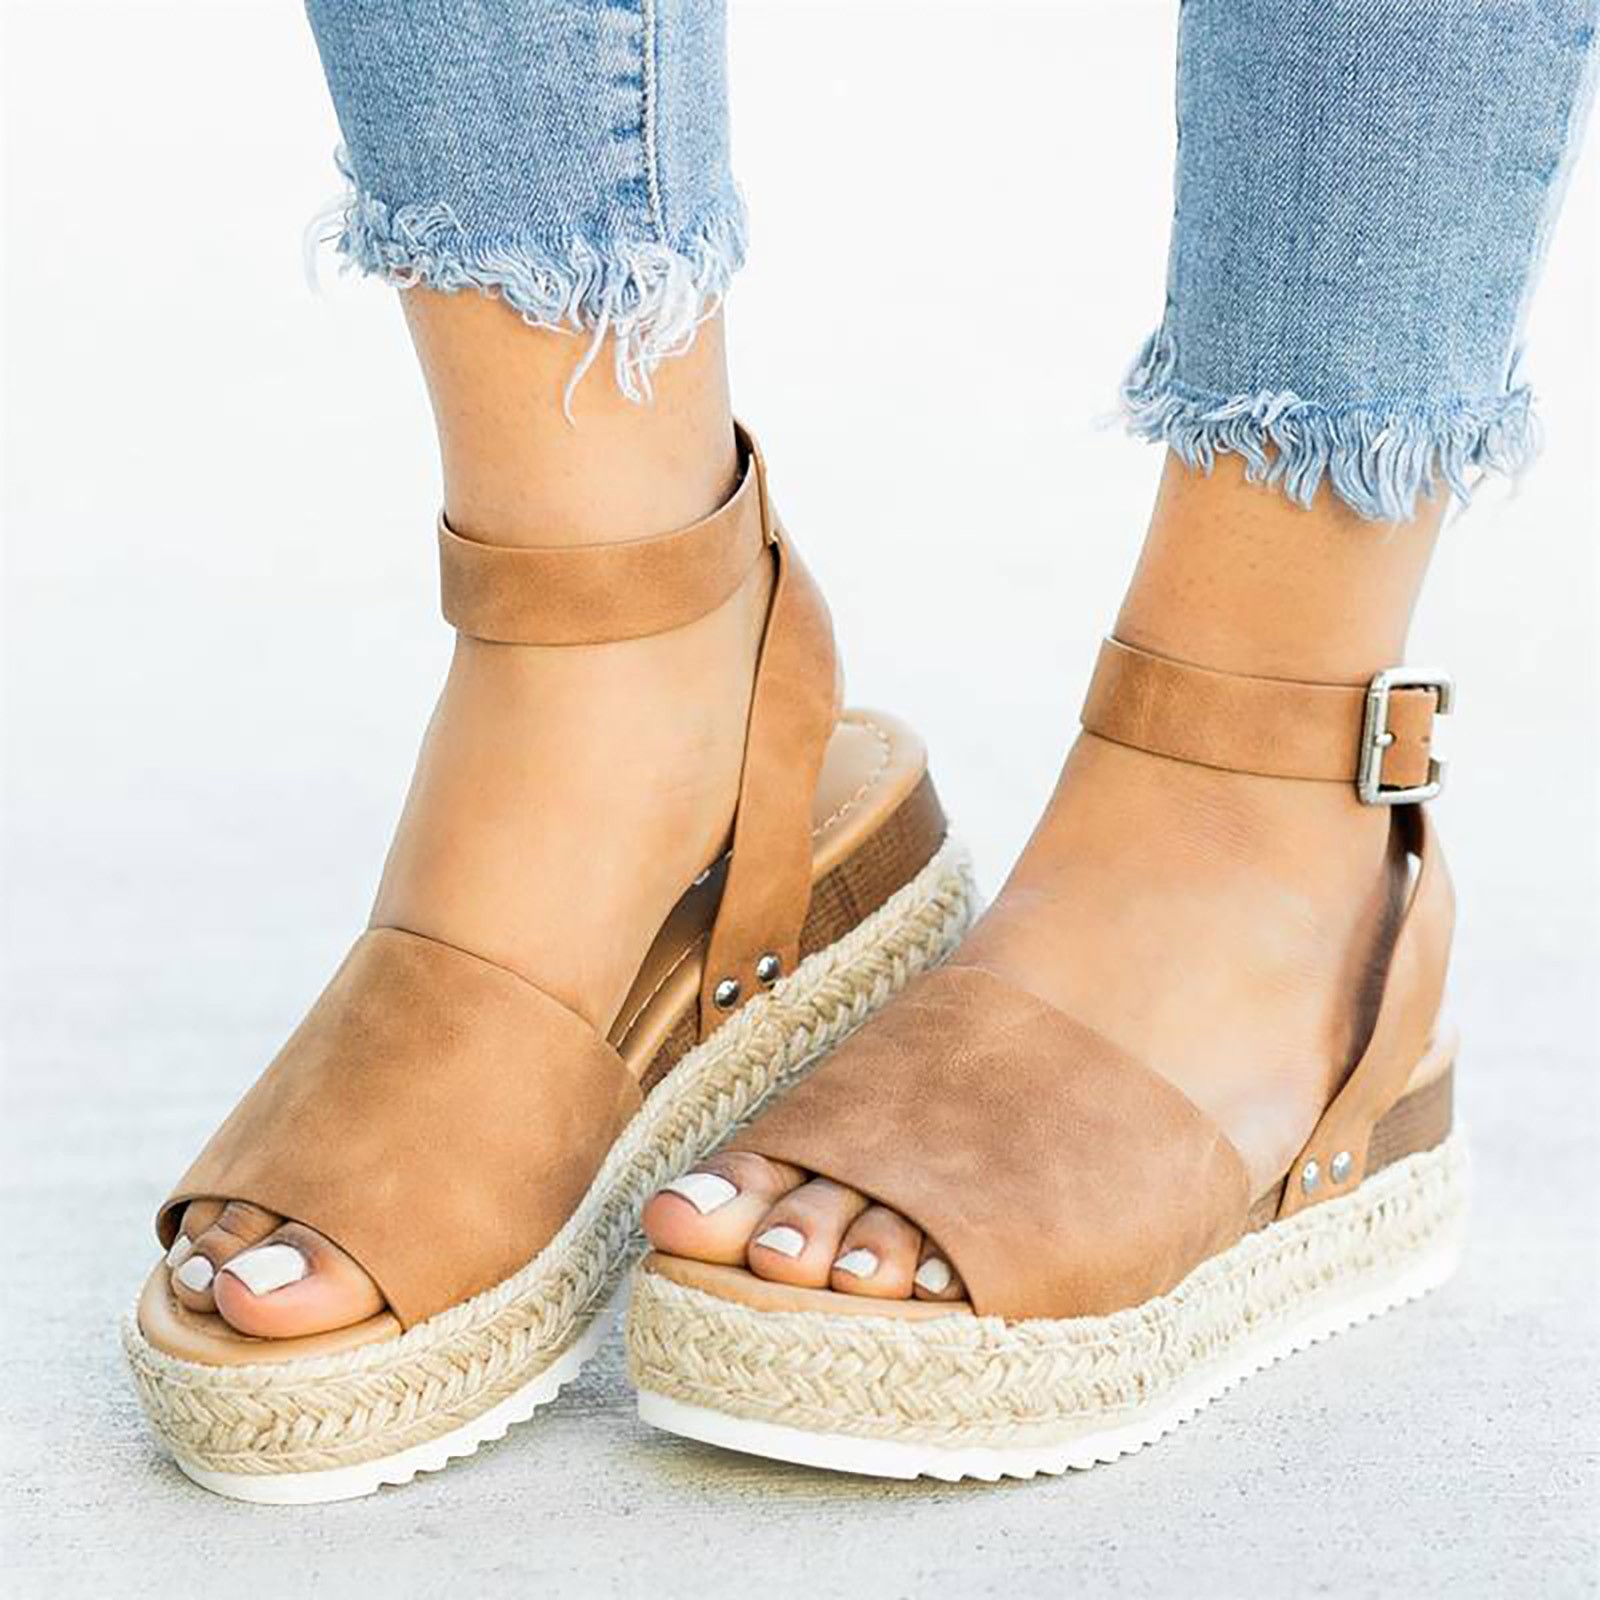 Azrian Woman Summer Sandals Open toe Casual Platform Wedge Shoes Casual Canvas Shoes - image 4 of 6